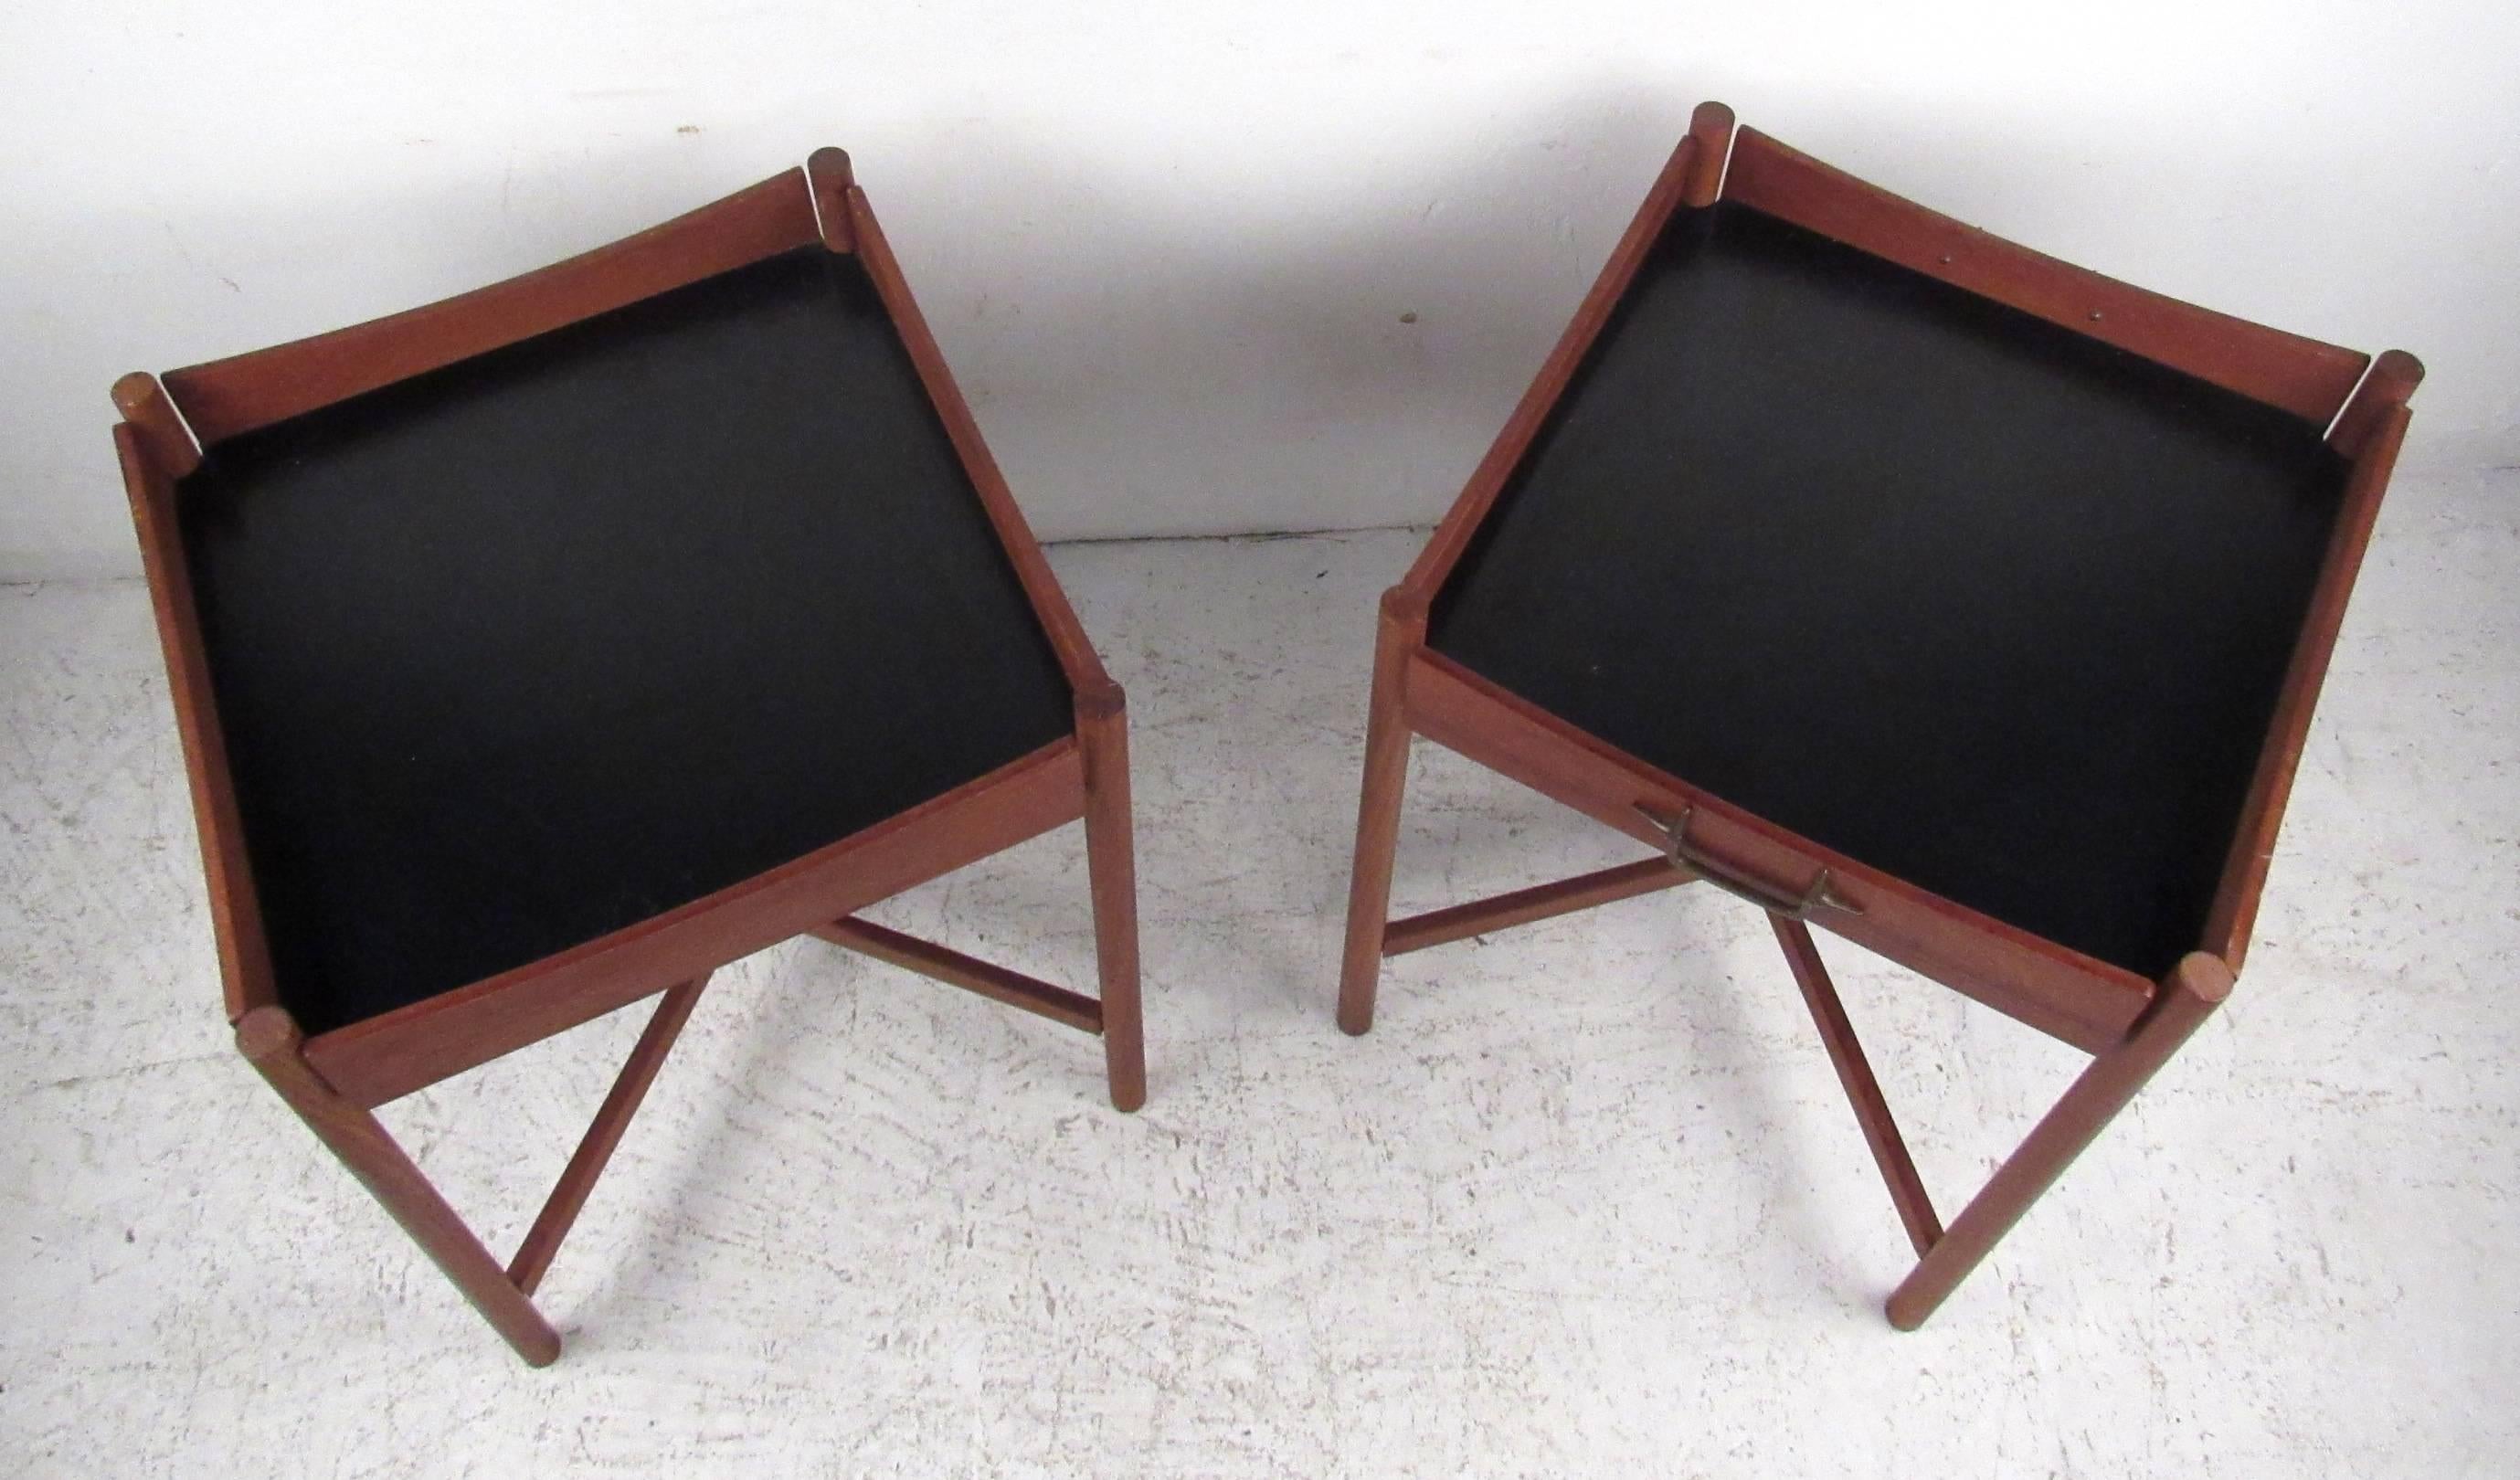 Two vintage modern tray tables featuring sculpted teak frames, black formica tops and brass handles. Designed by mid-century artist Mogens Lysell, these tray tables are as handy as they are distinct. Perfect for holding indoor plants, or concealing